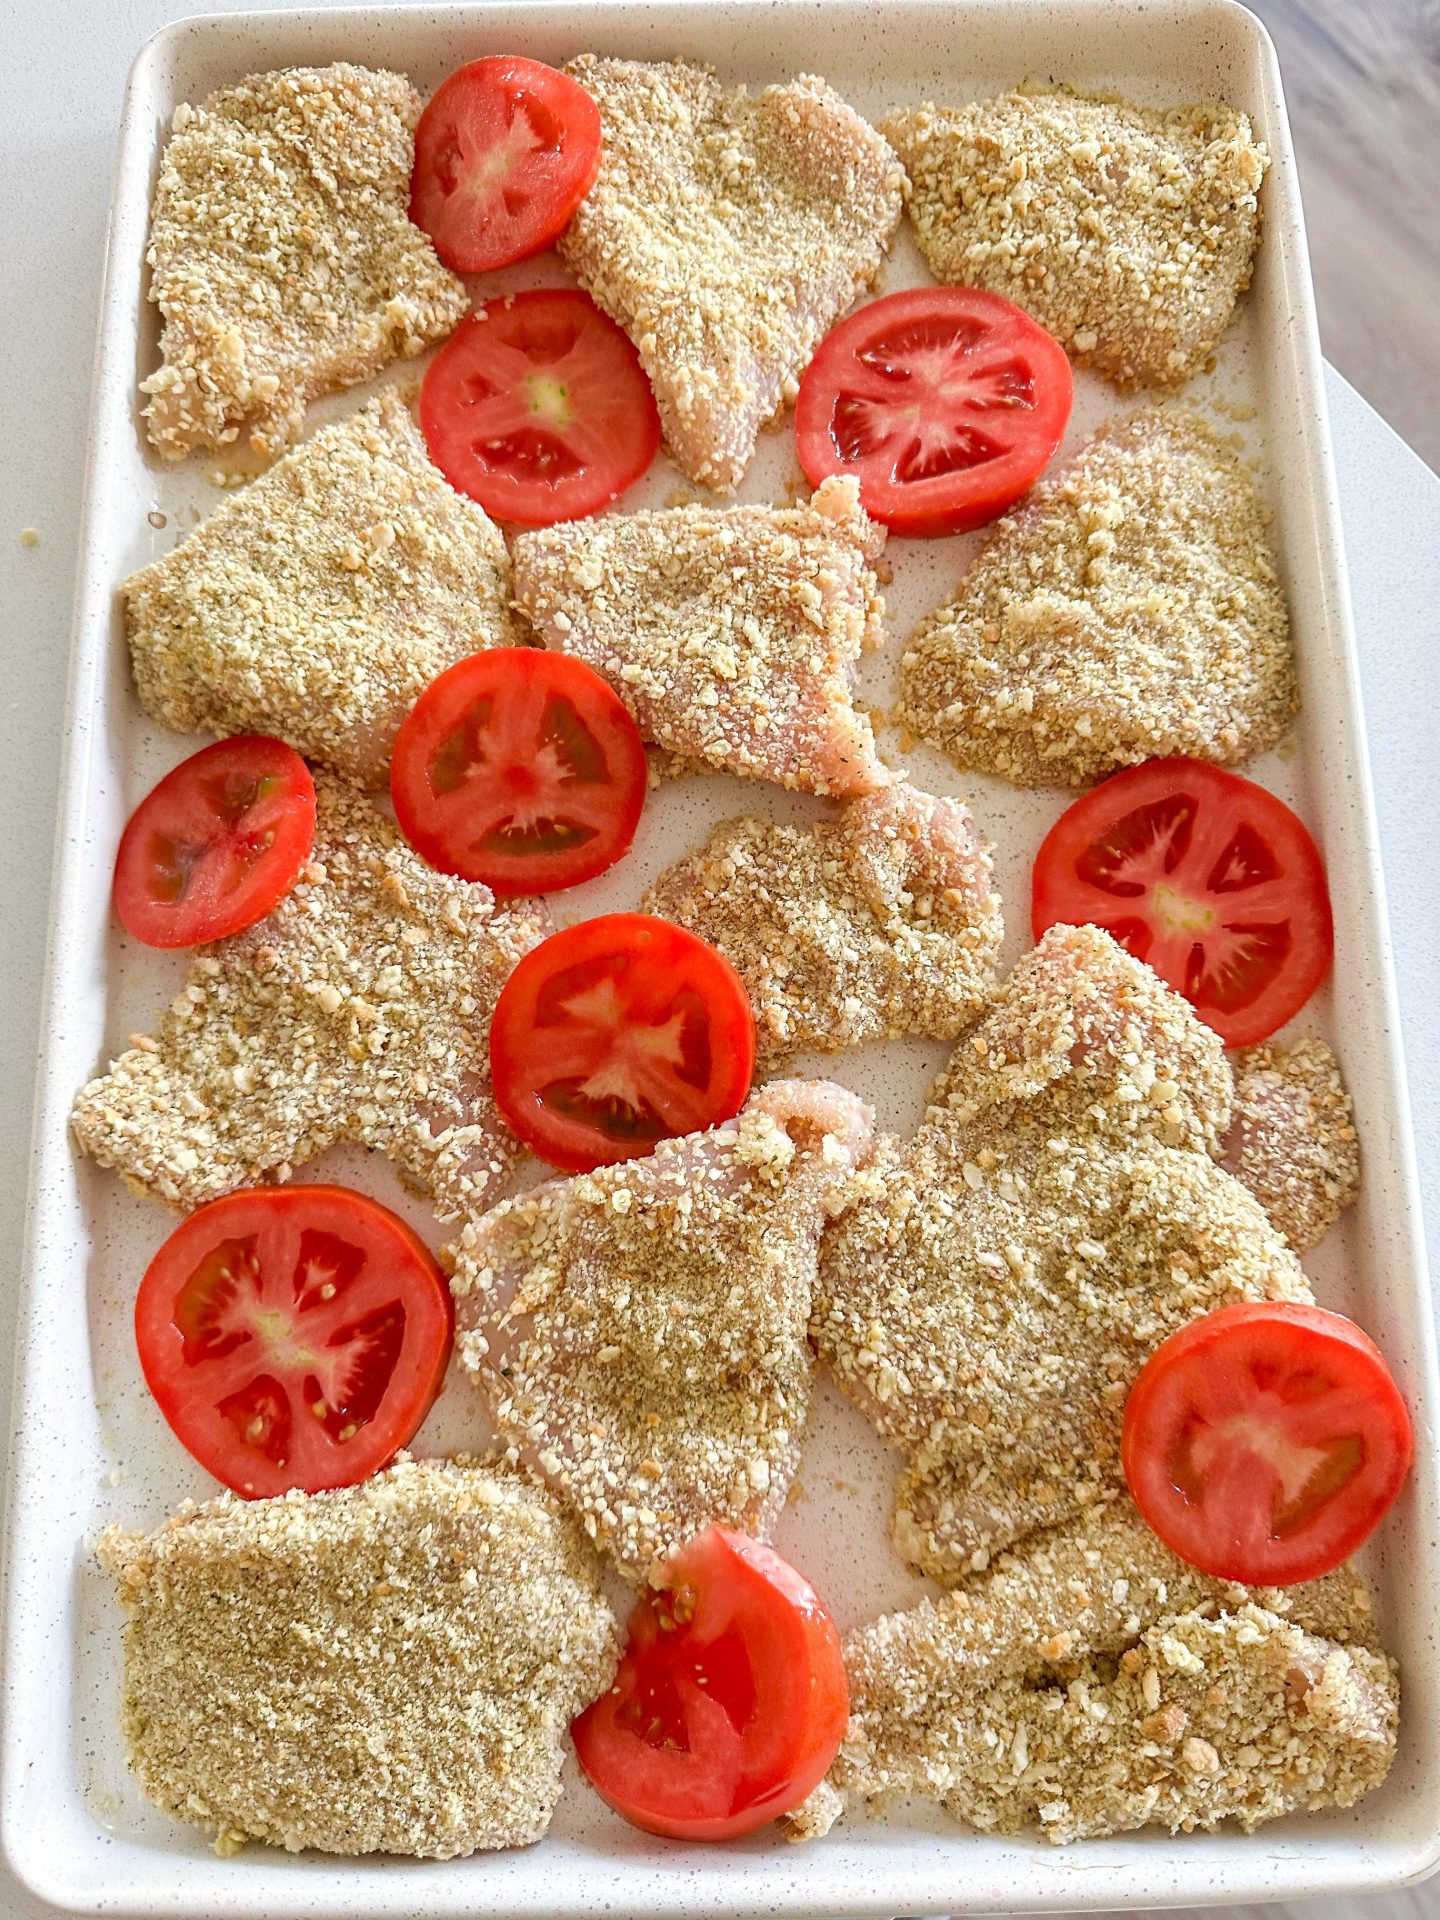 chicken parm, gluten-free, Italian bread crumbs, tomatoes, fried tomatoes, mozzarella , fresh warm, chicken dinner, healthy dinner night, food idea, quick easy meal, food